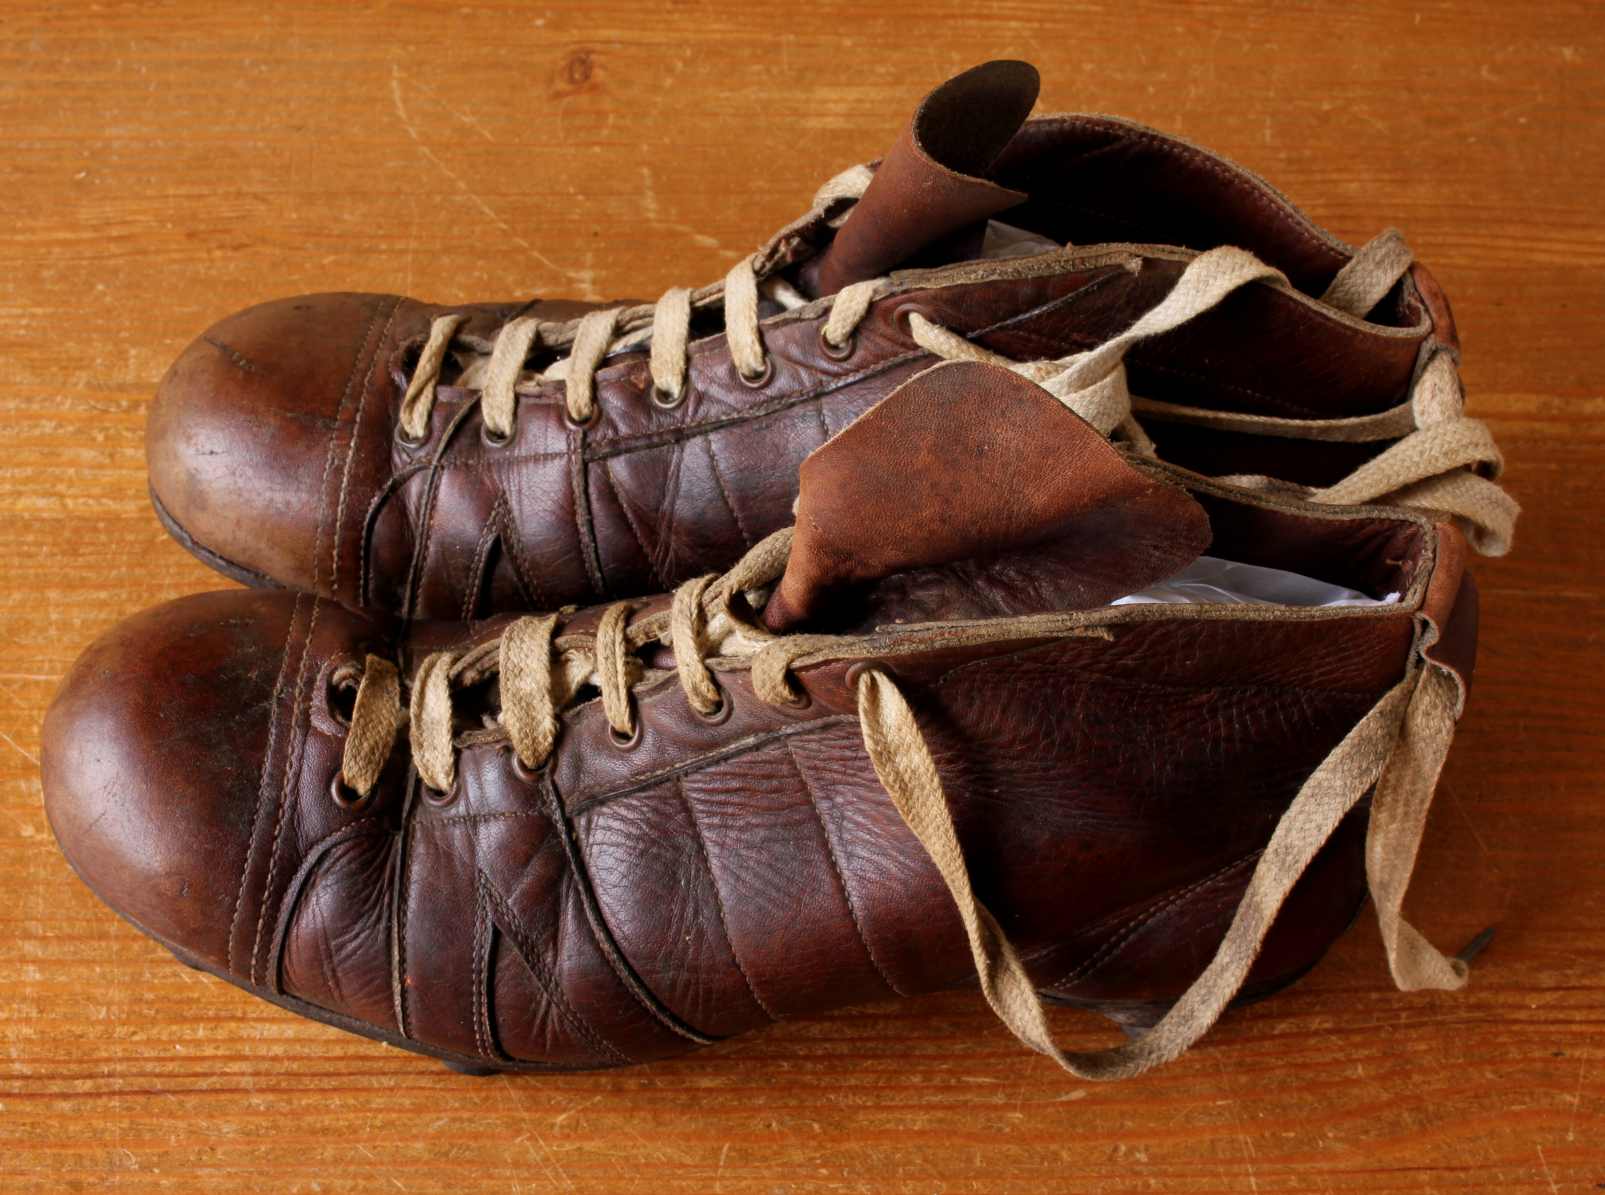 Vintage Football Boots With Leather Bar Studs. Soccer Shoes. c1950.